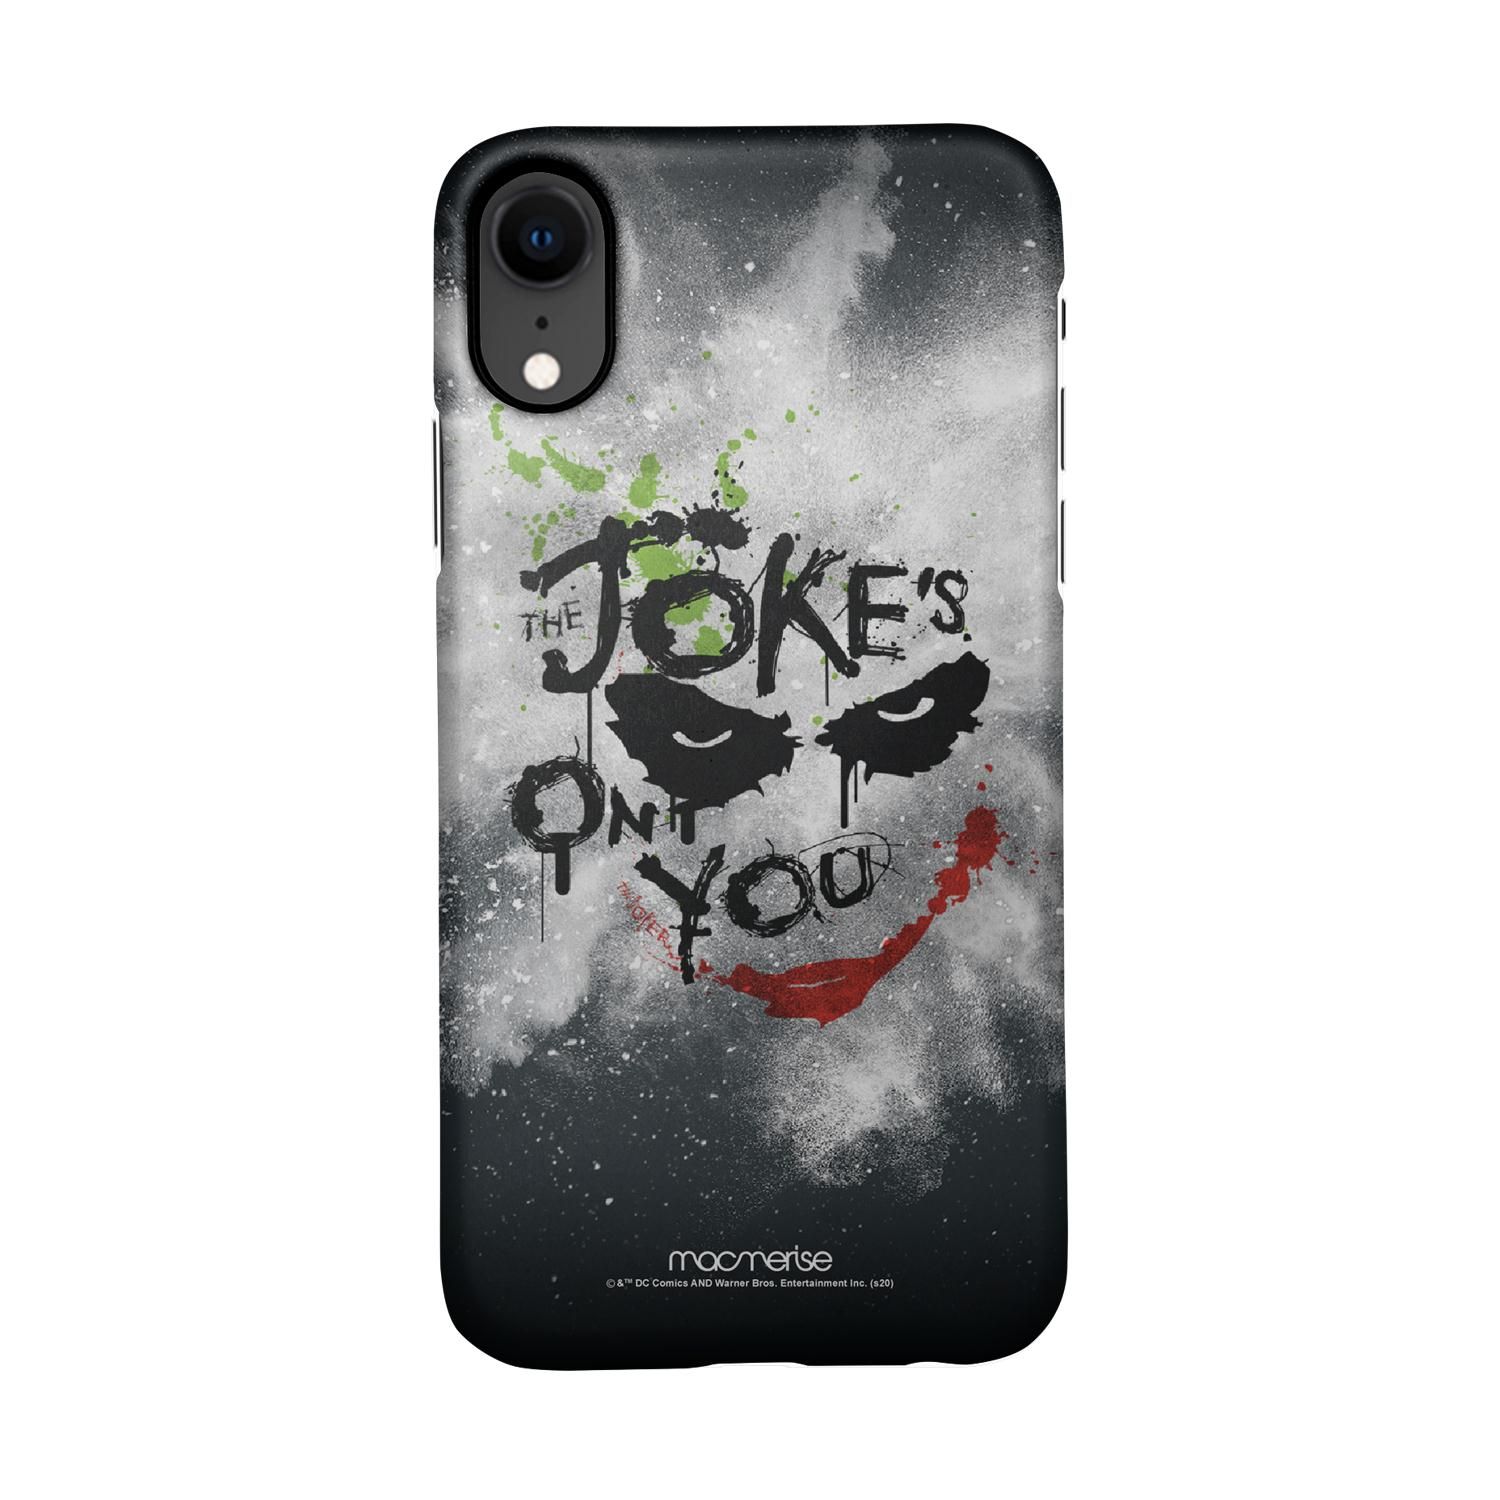 Buy The Jokes on you - Sleek Phone Case for iPhone XR Online